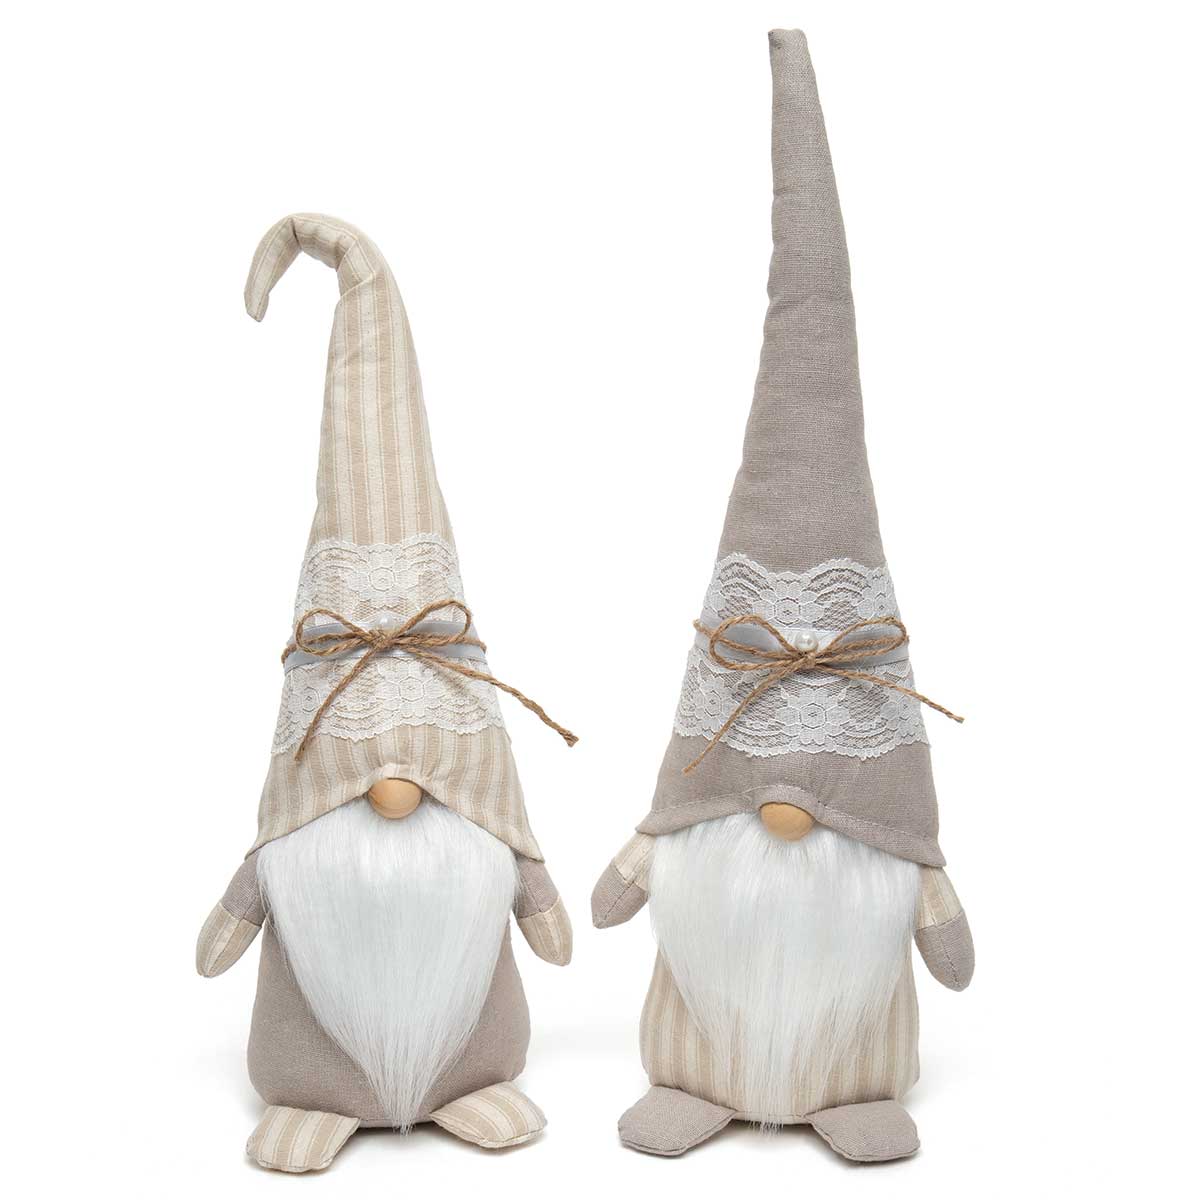 Vintage Lace Gnome Beige/Cream/Grey with Wired Hat, Arms and Fee